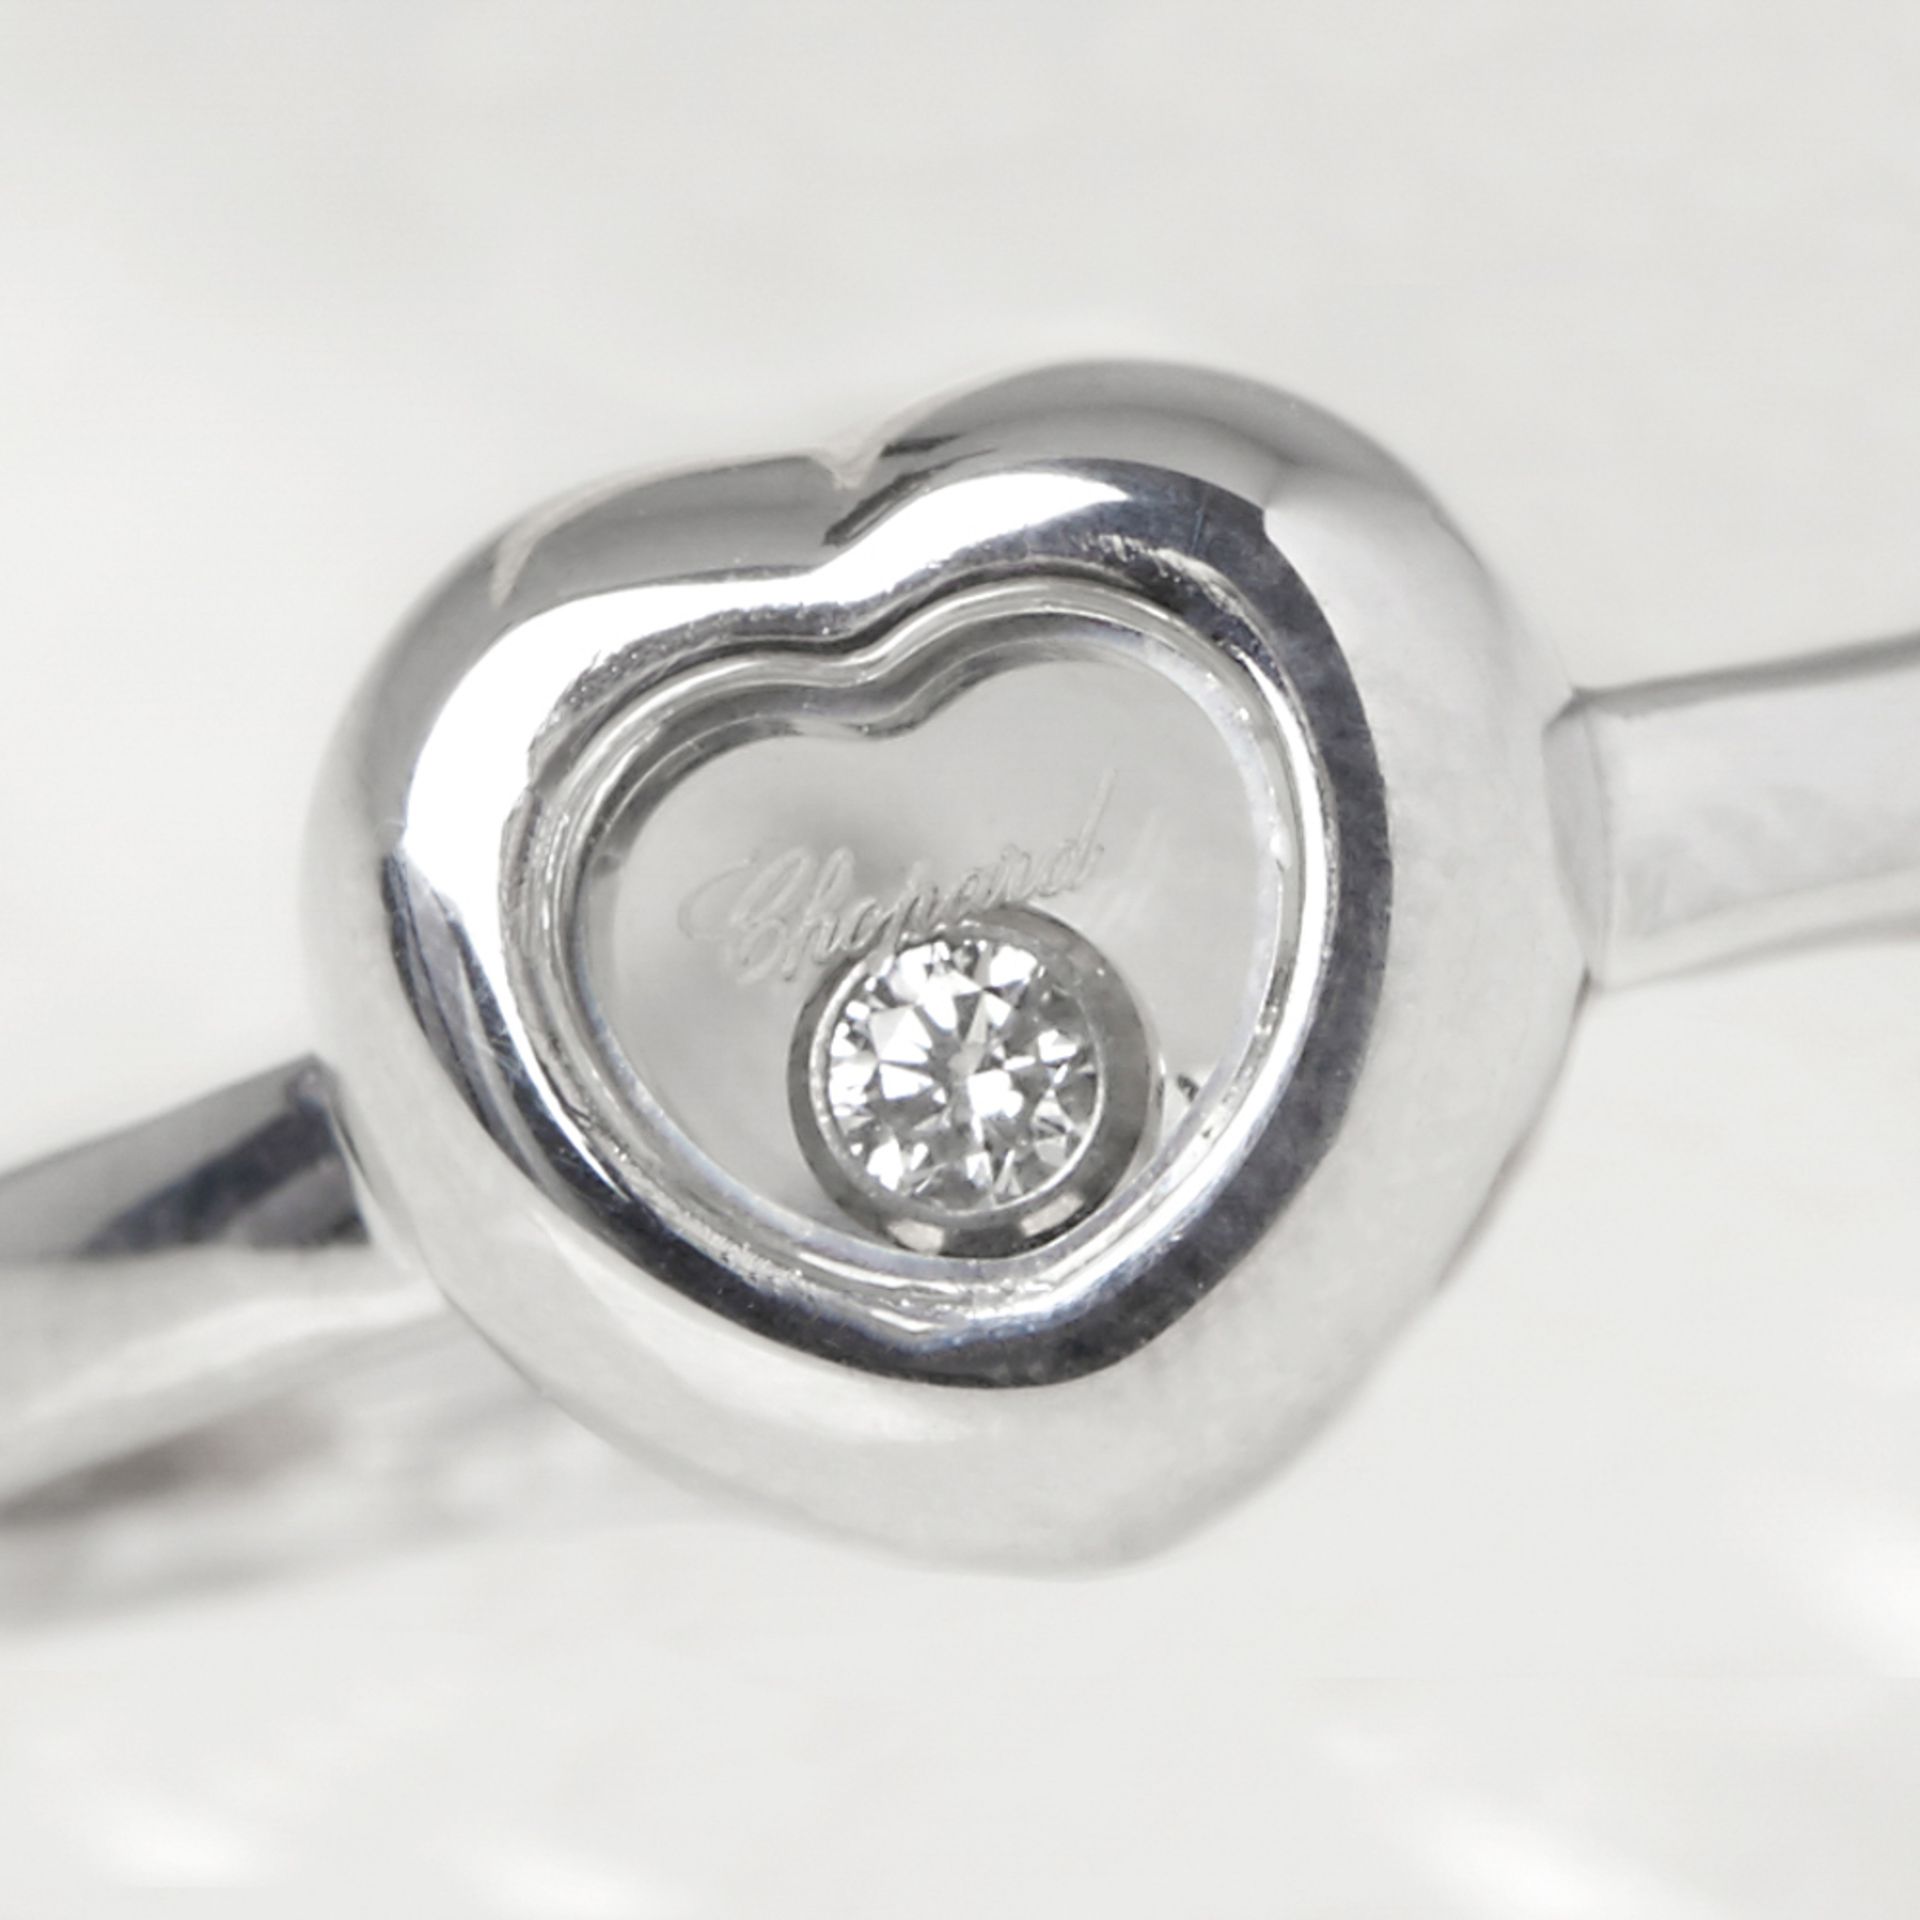 Chopard 18k White Gold Heart Small Happy Diamonds Ring - Image 2 of 8